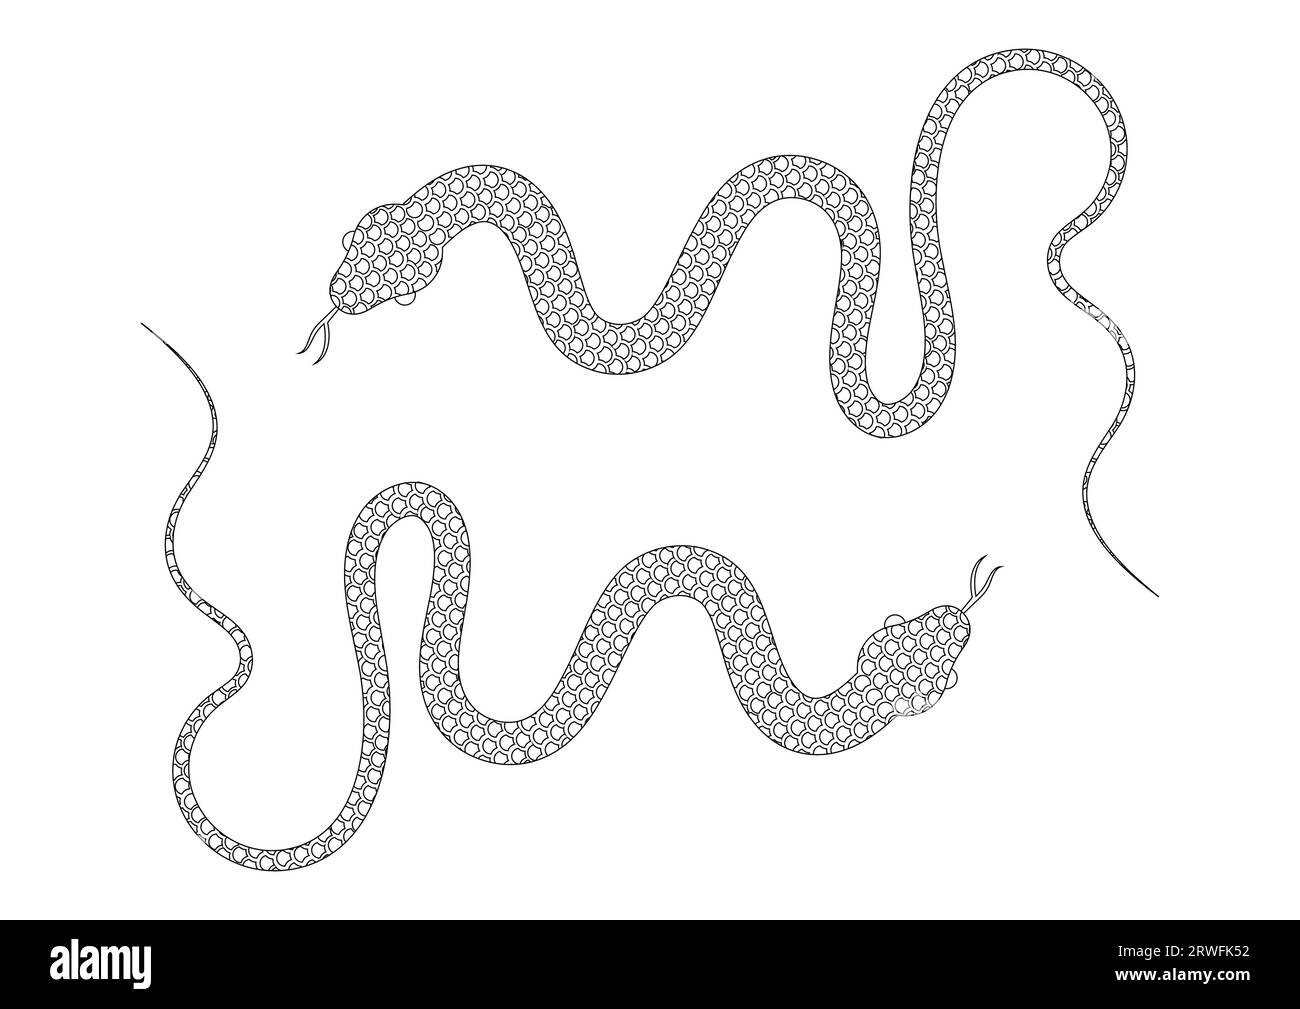 Black and White Snake Vector Illustration. Coloring Page of Two Snakes ...